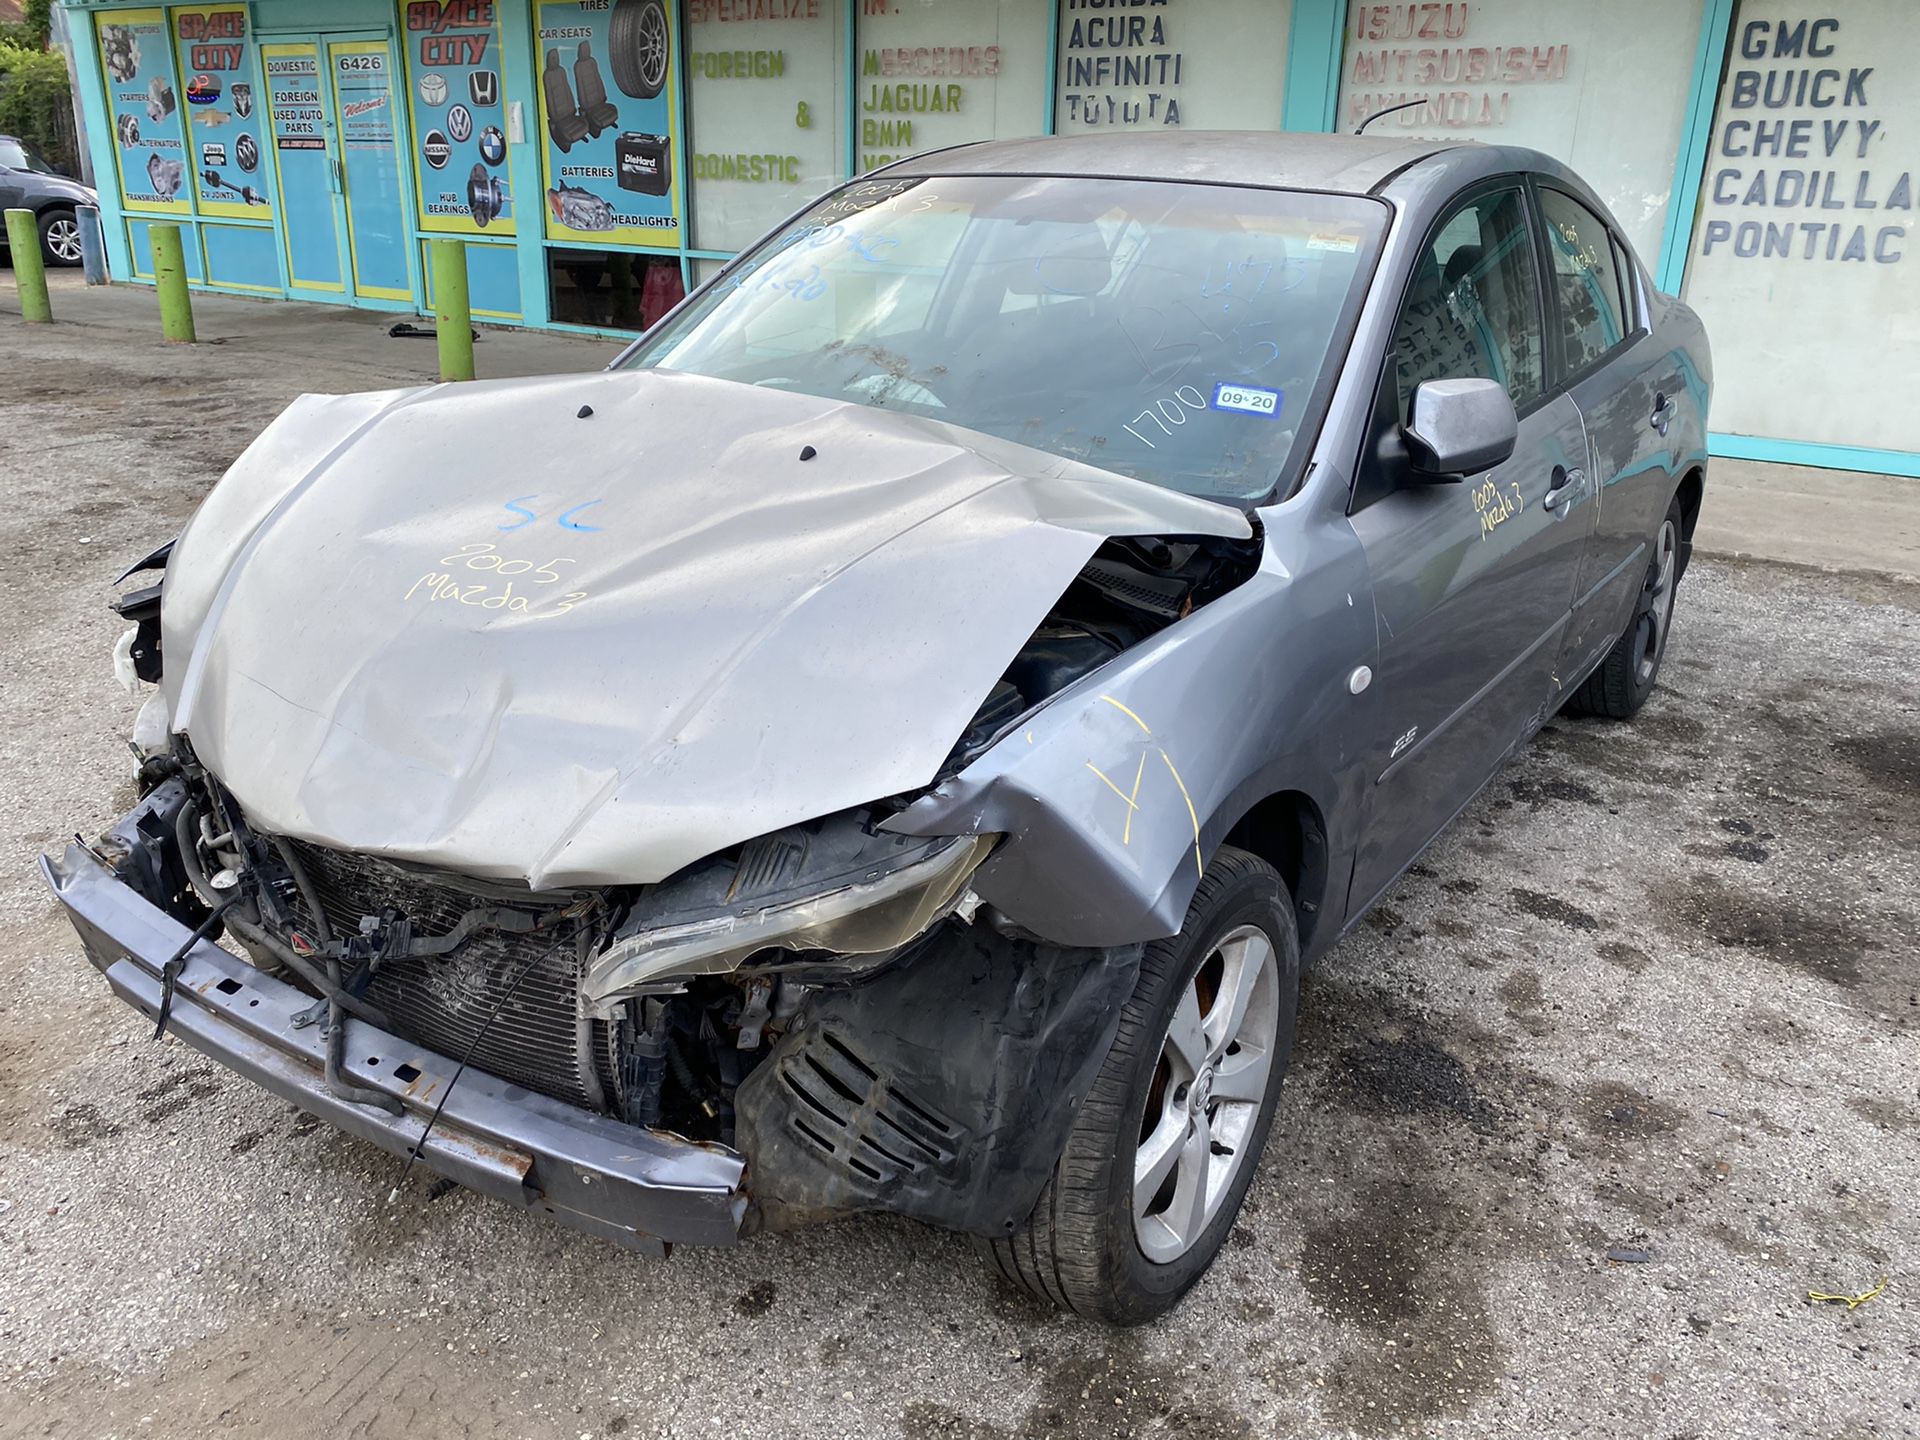 2005 Mazda 3 for parts!